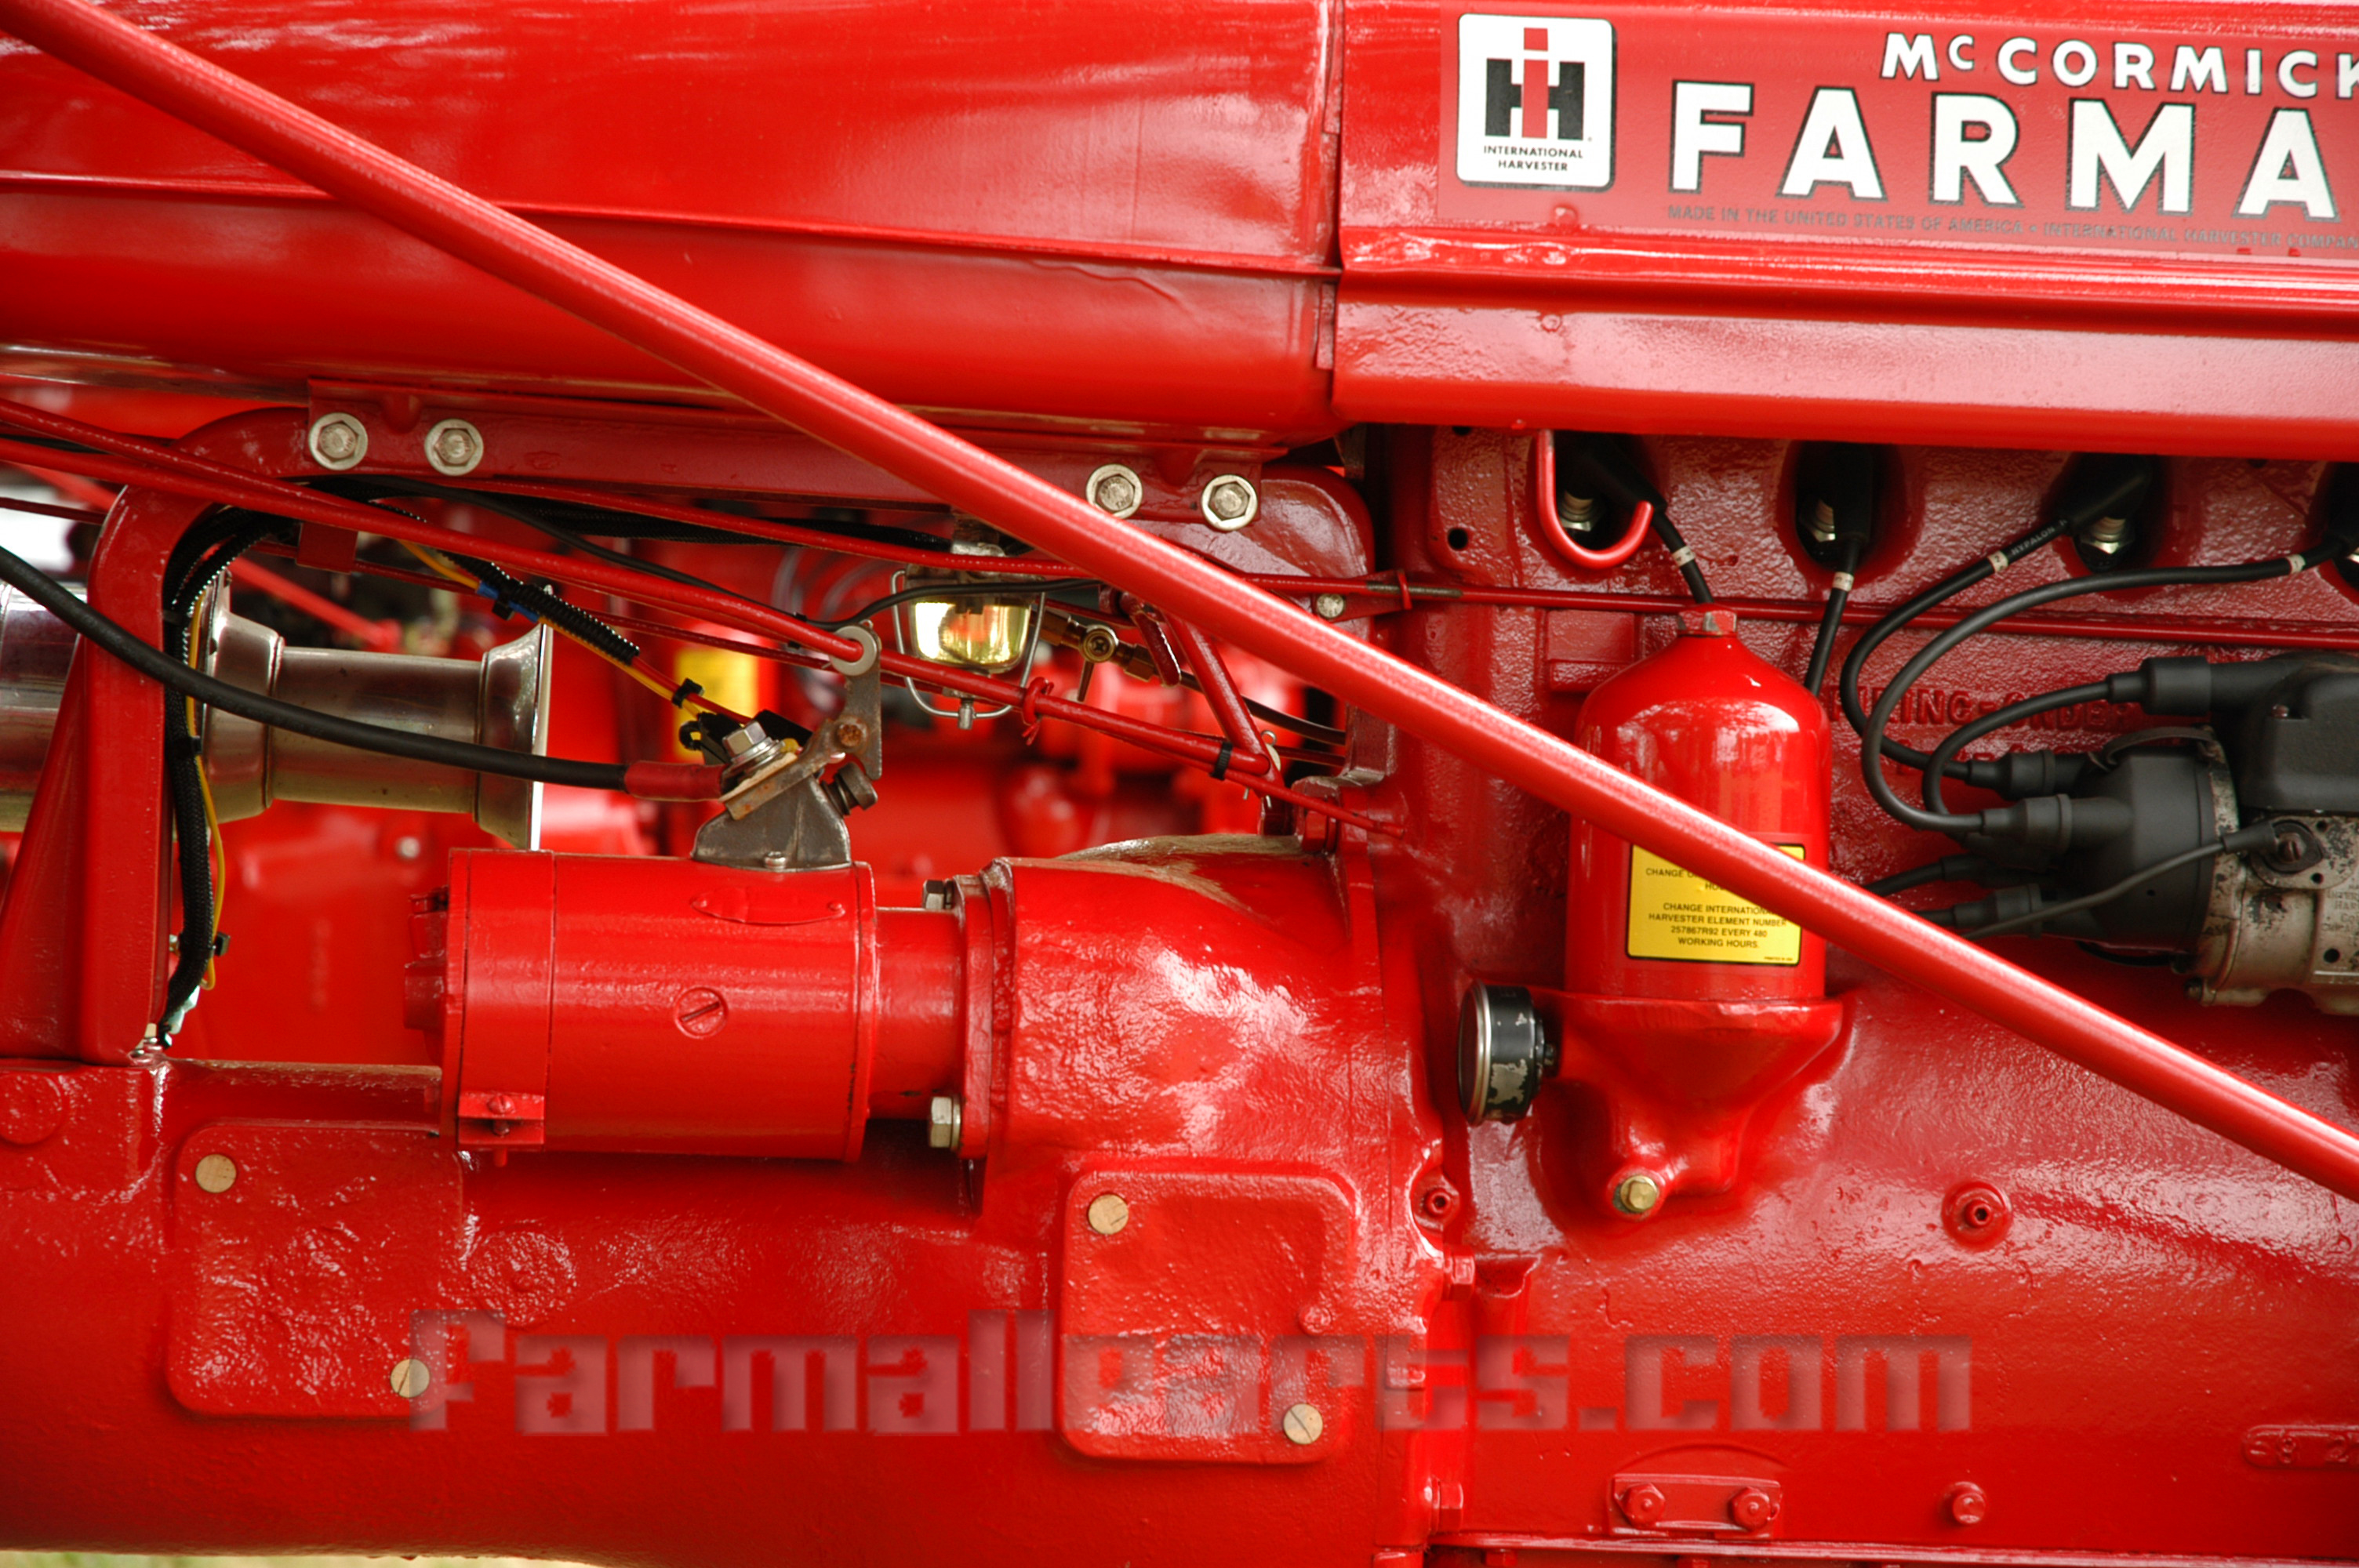 International Harvester Farmall Farmall A with Stater